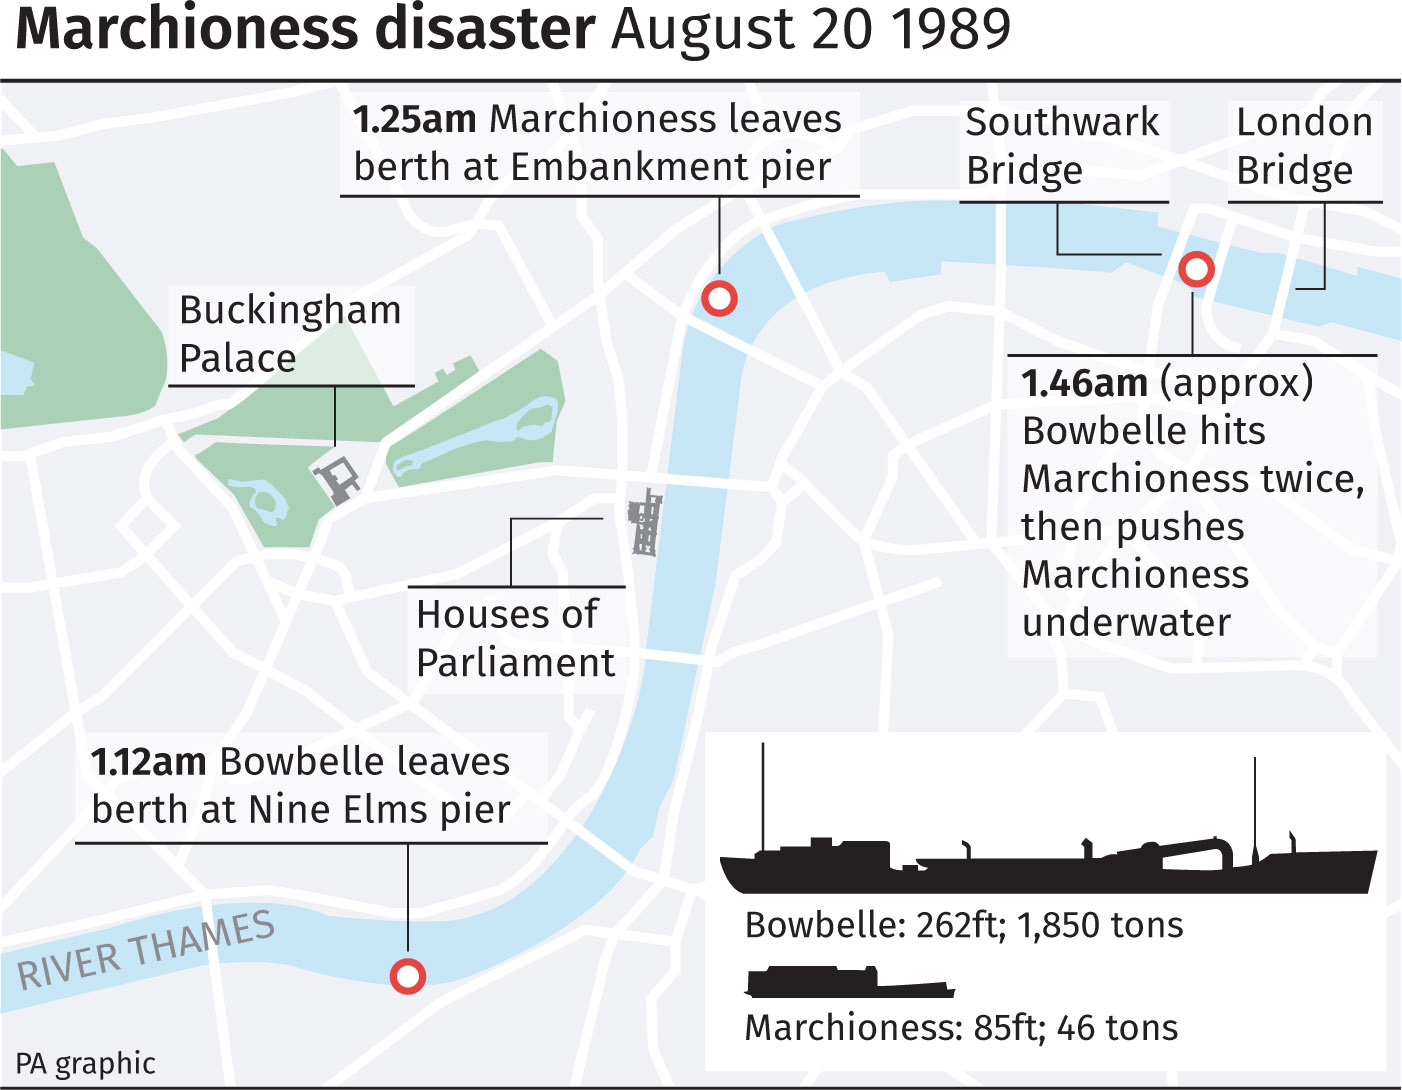 Marchioness disaster